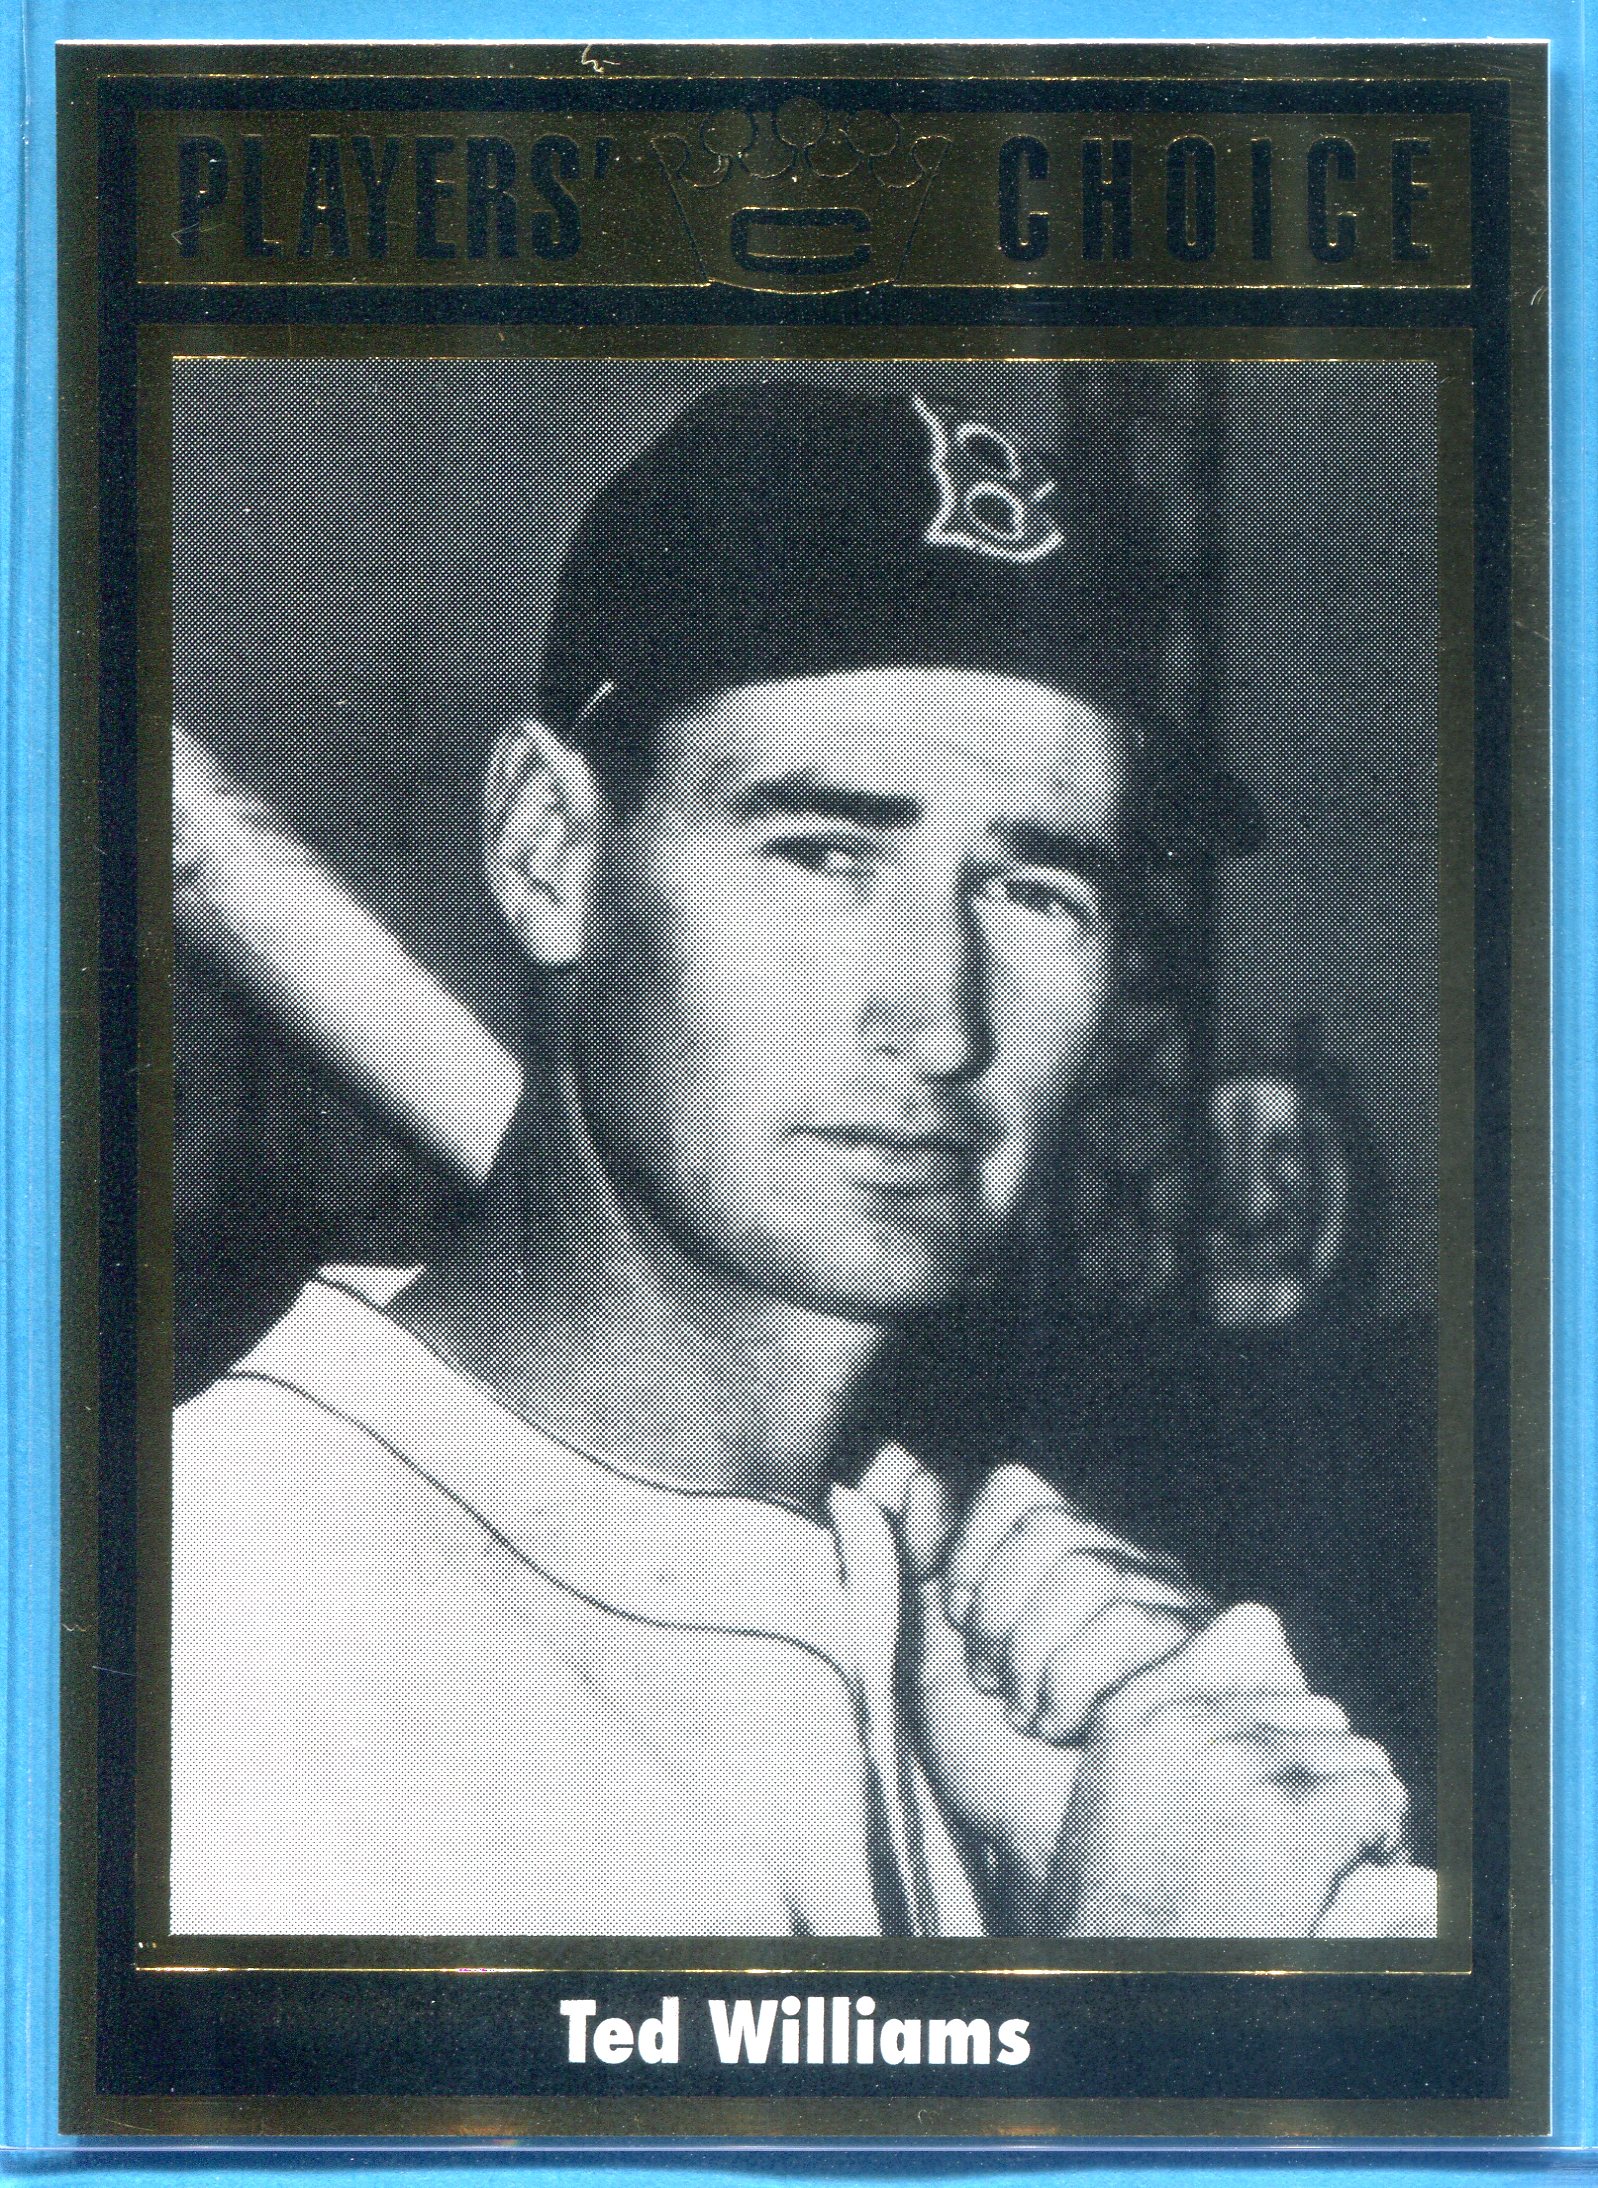 1993 Cartwright's Player's Choice Gold Foil Card #9 Ted Williams